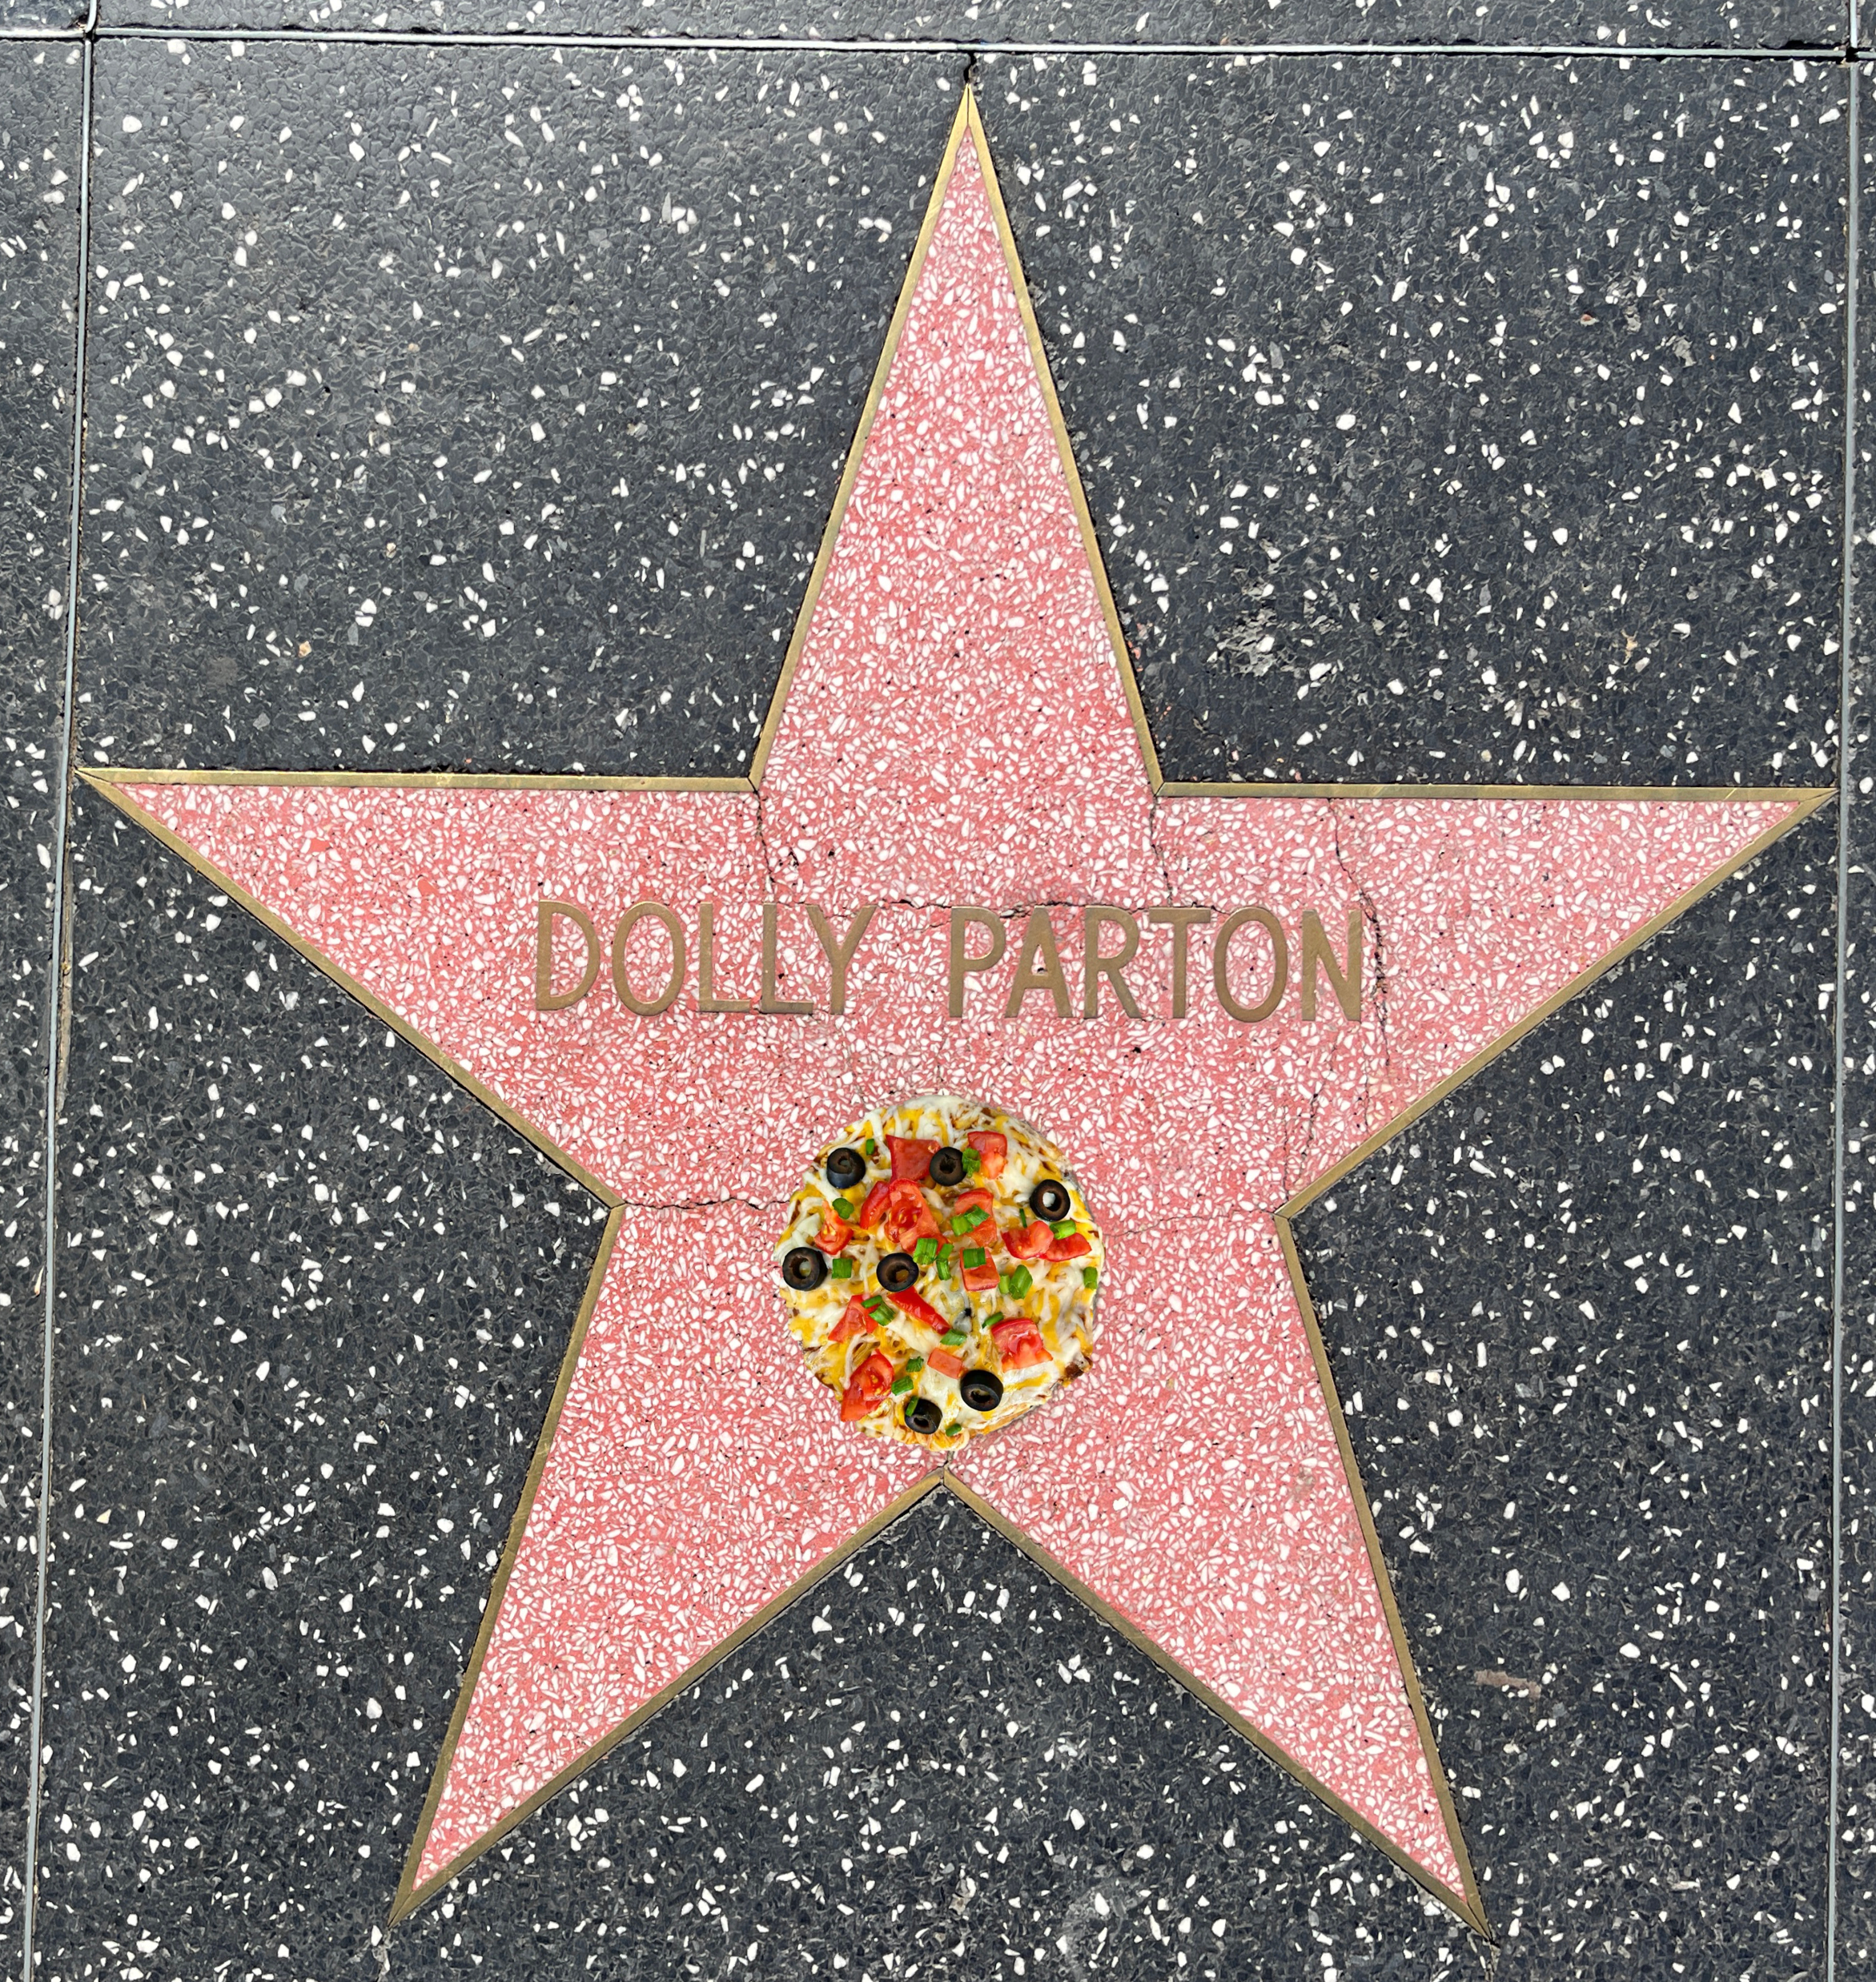 Dolly Parton's star on the Hollywood Walk of Fame with a Mexican Pizza on top